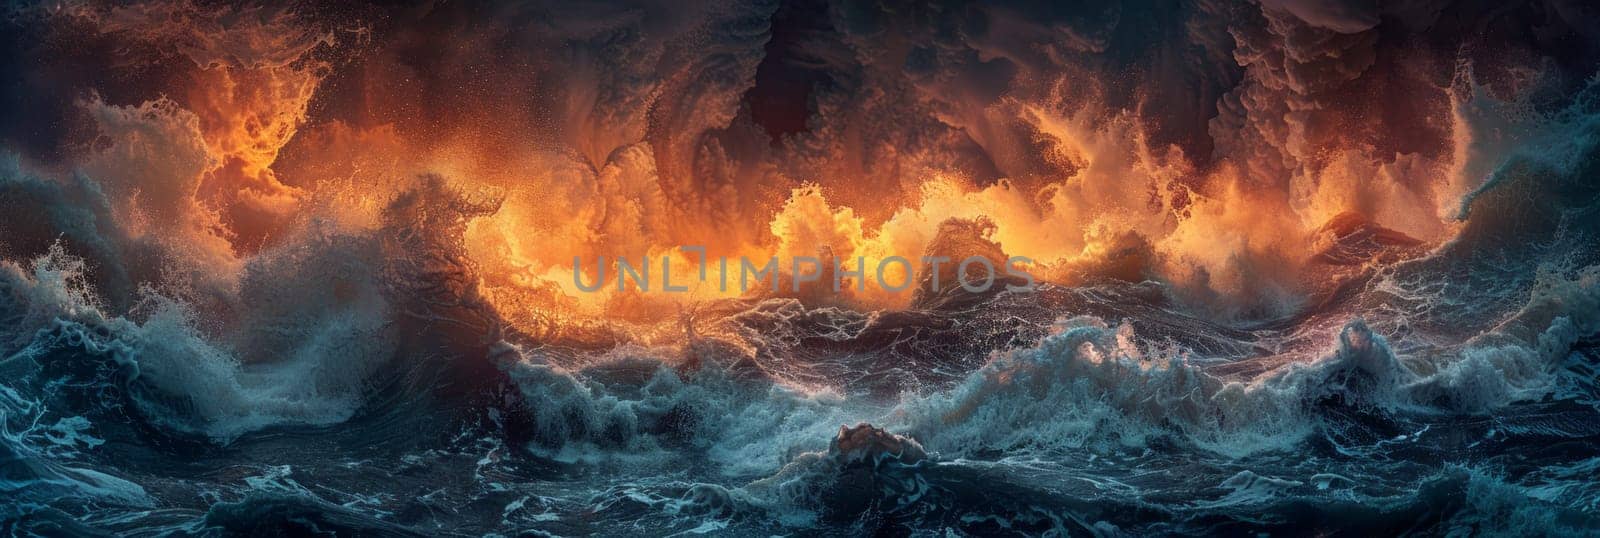 A mesmerizing painting depicting the contrasting elements of fire and water in an ocean setting, creating a dynamic and harmonious composition by but_photo